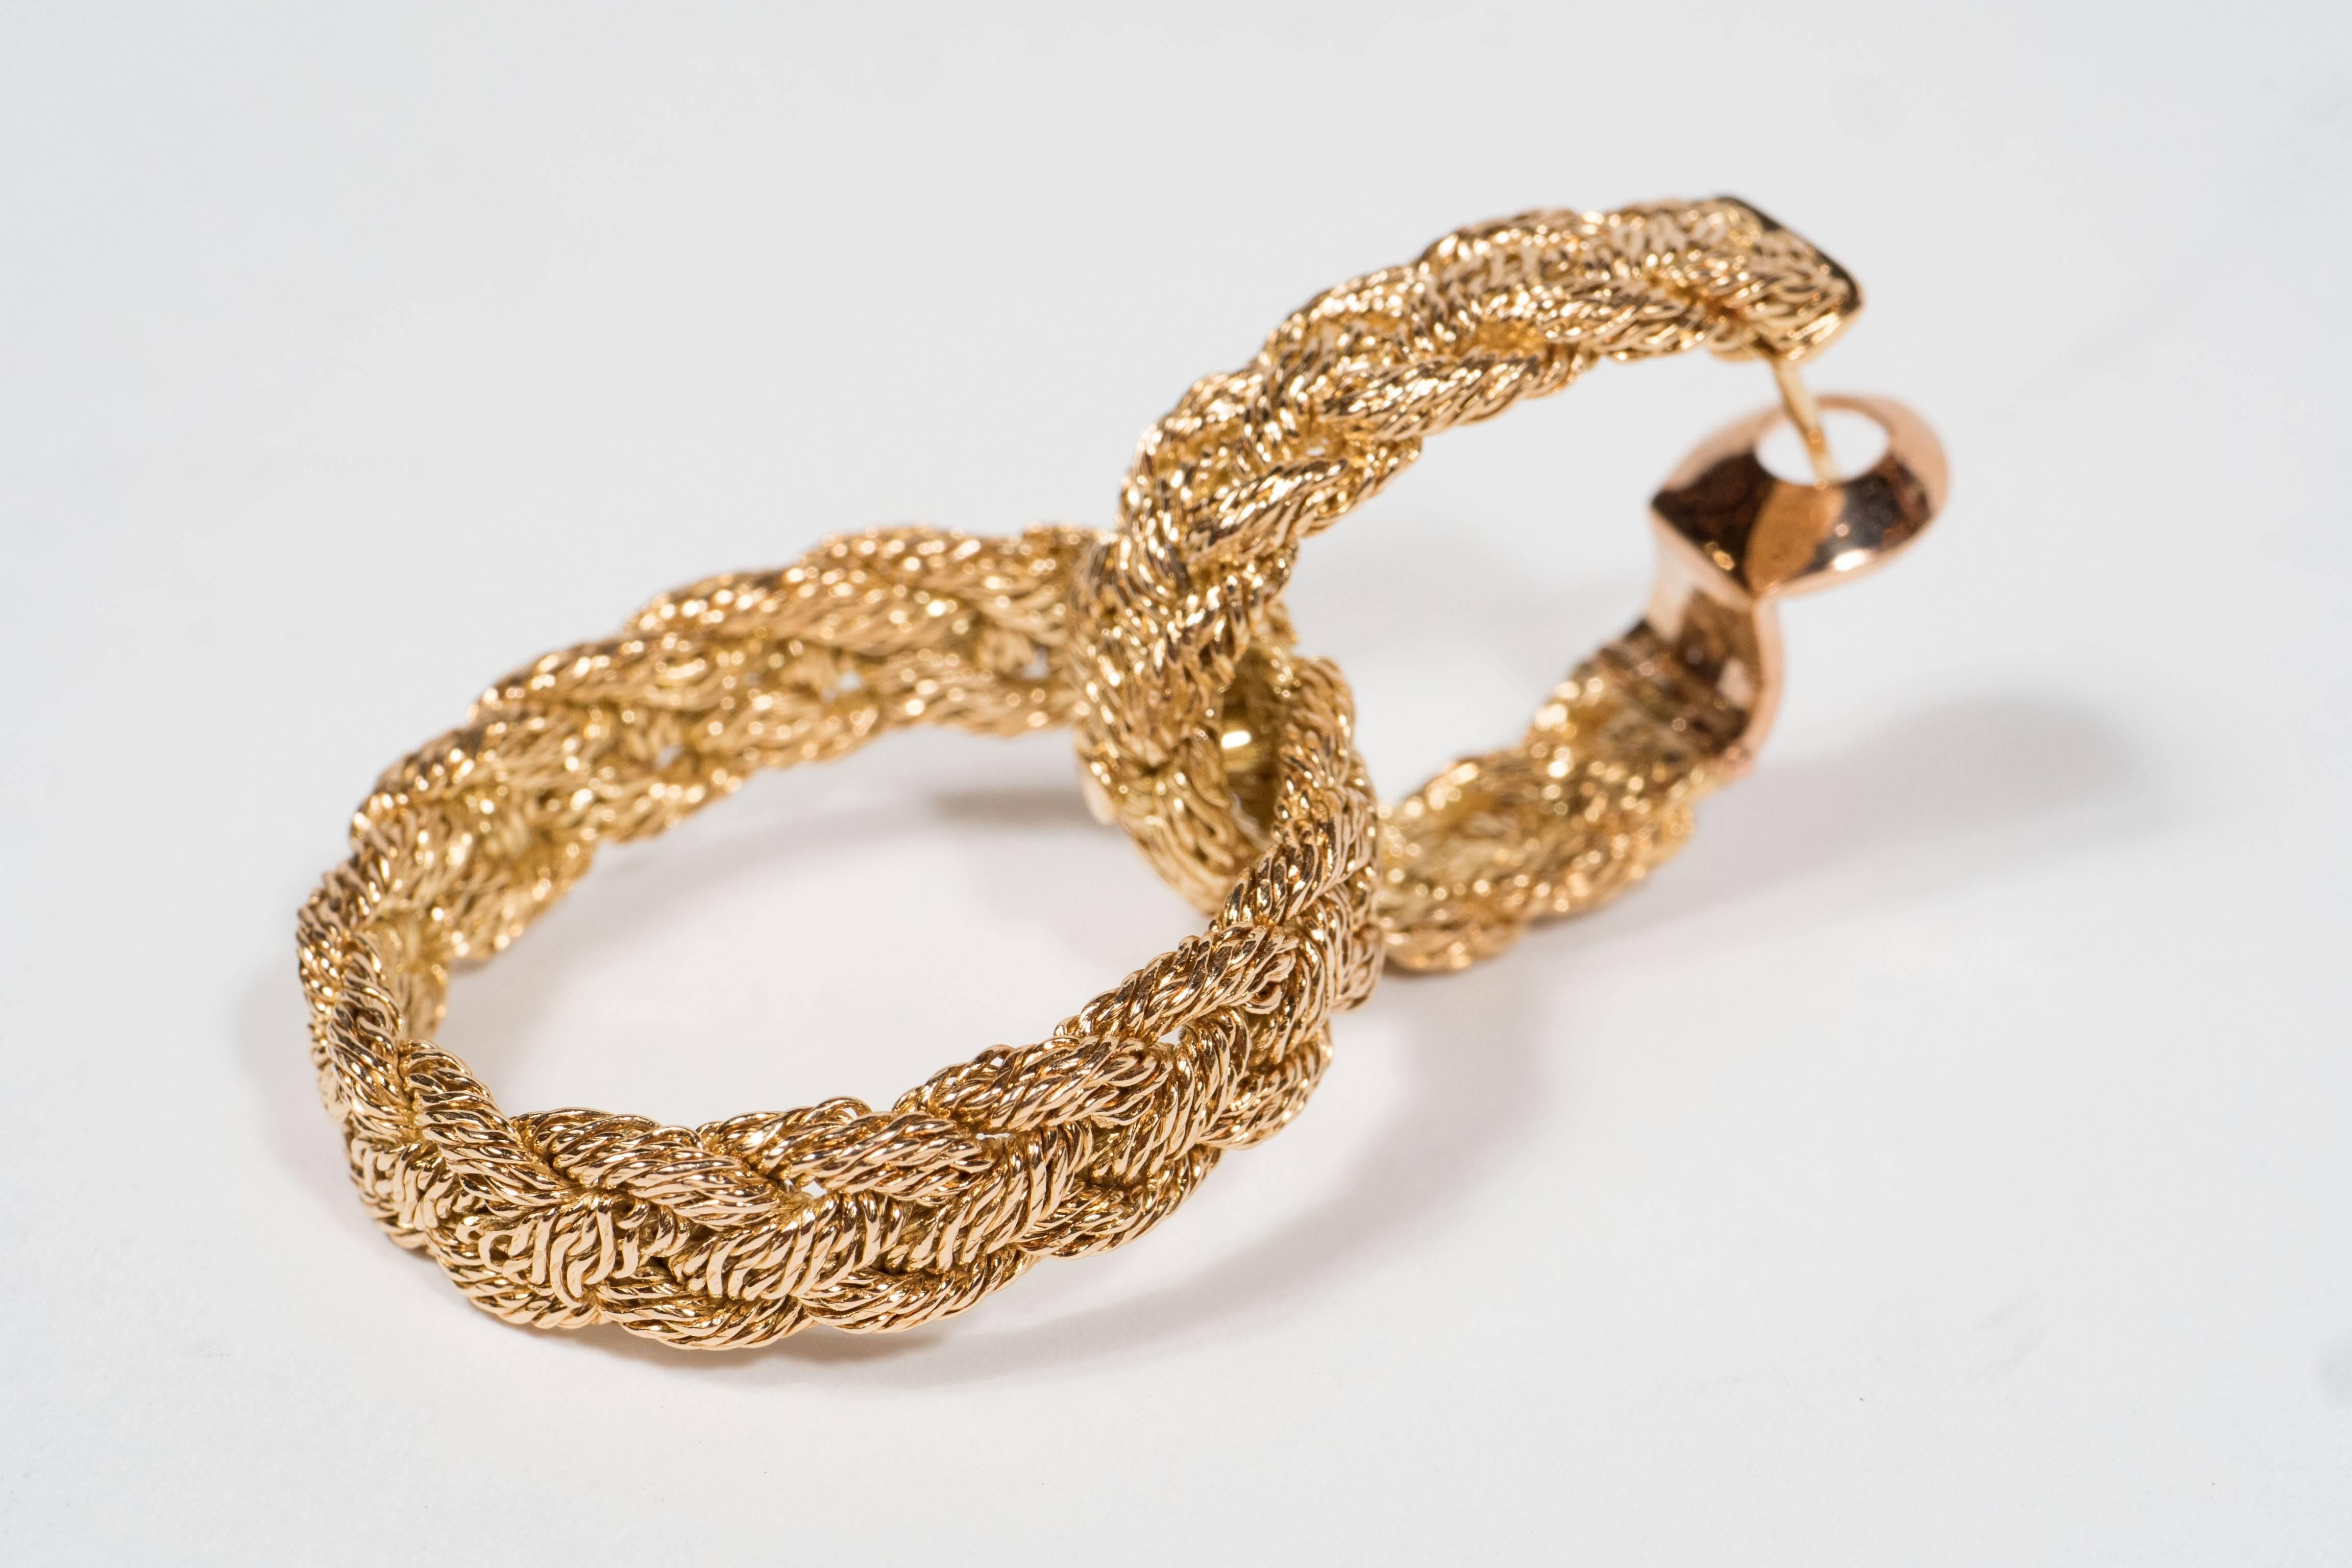 These stunning earrings feature a double loop design in woven 18k yellow gold. They are comprised of braided gold twists in an elegant door-knocker design. They are currently fitted for pierced ears but could be converted to clips. They are signed